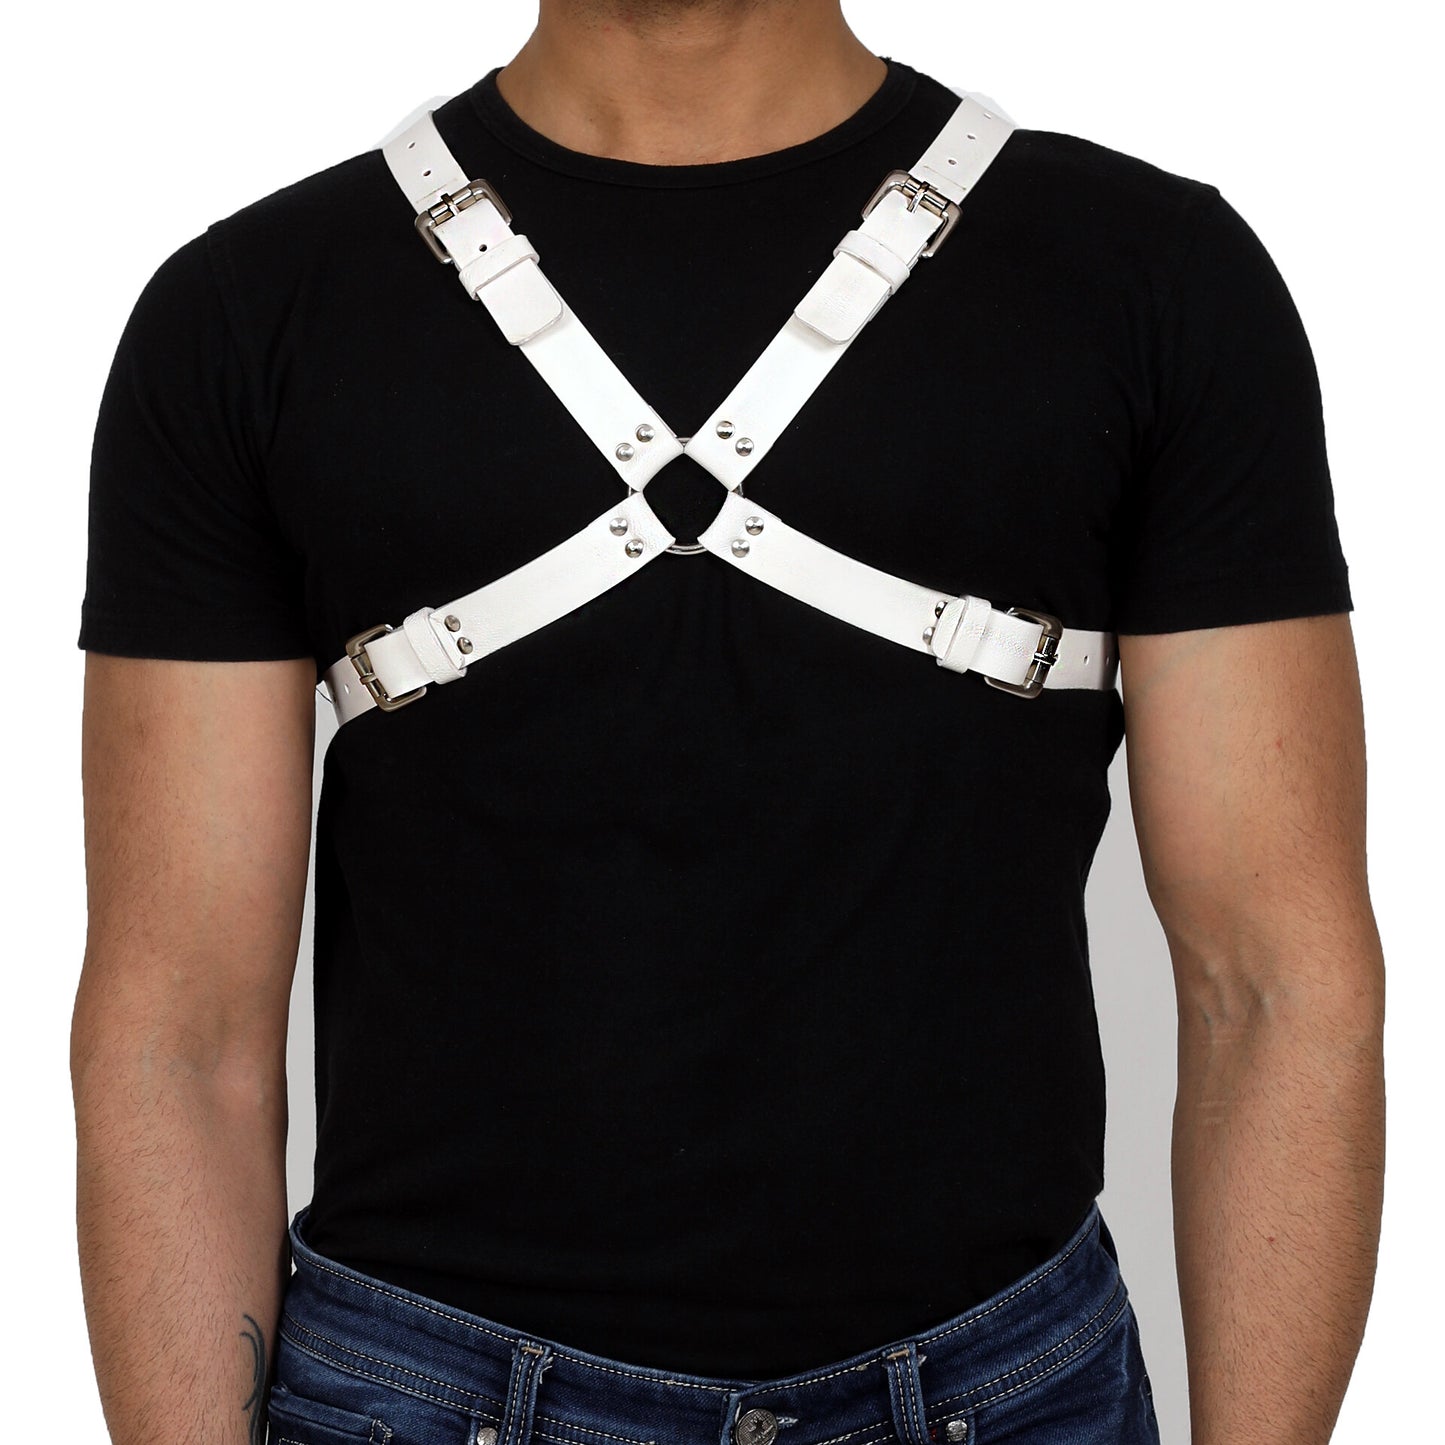 CLASSIC 'X' HARNESS - Subculture